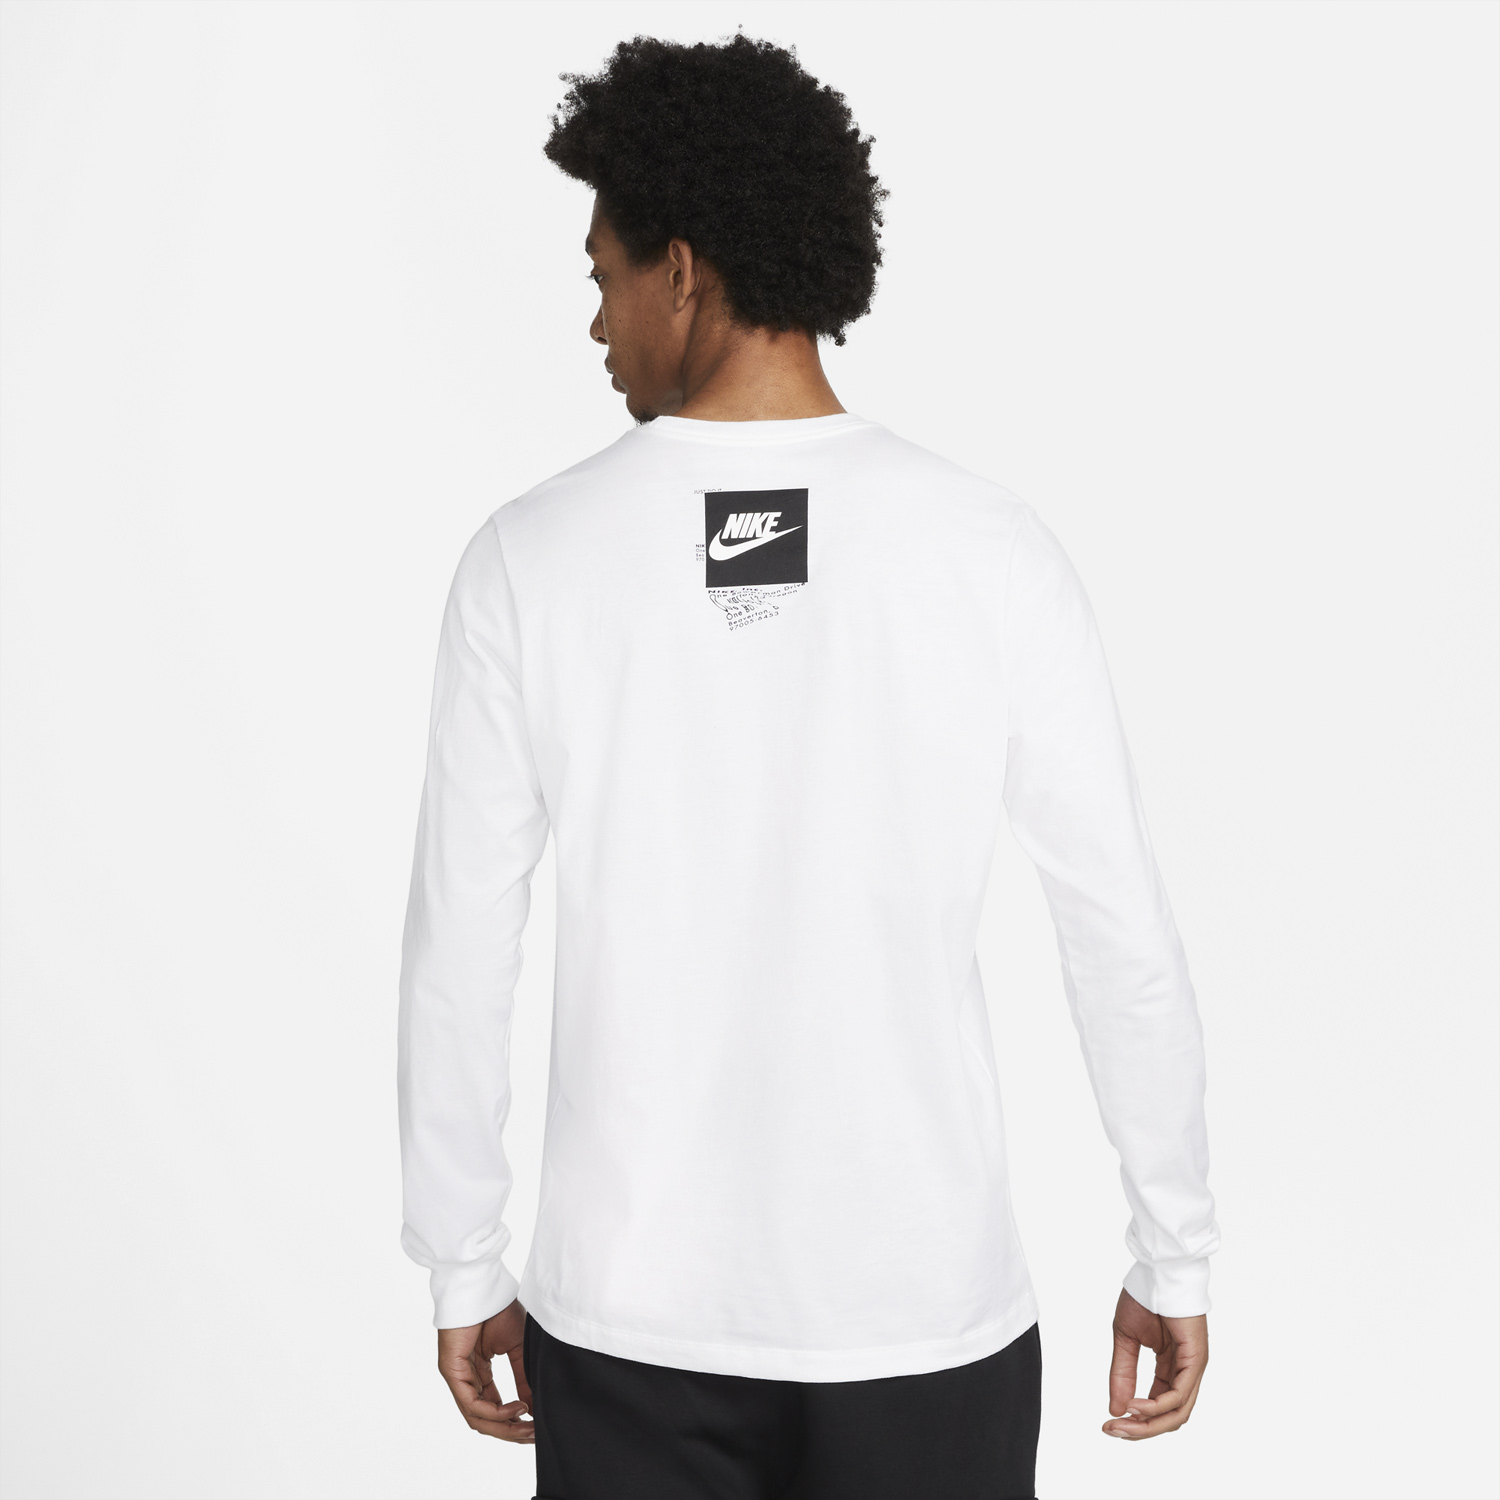 nike-alter-and-reveal-long-sleeve-t-shirt-white-black-2